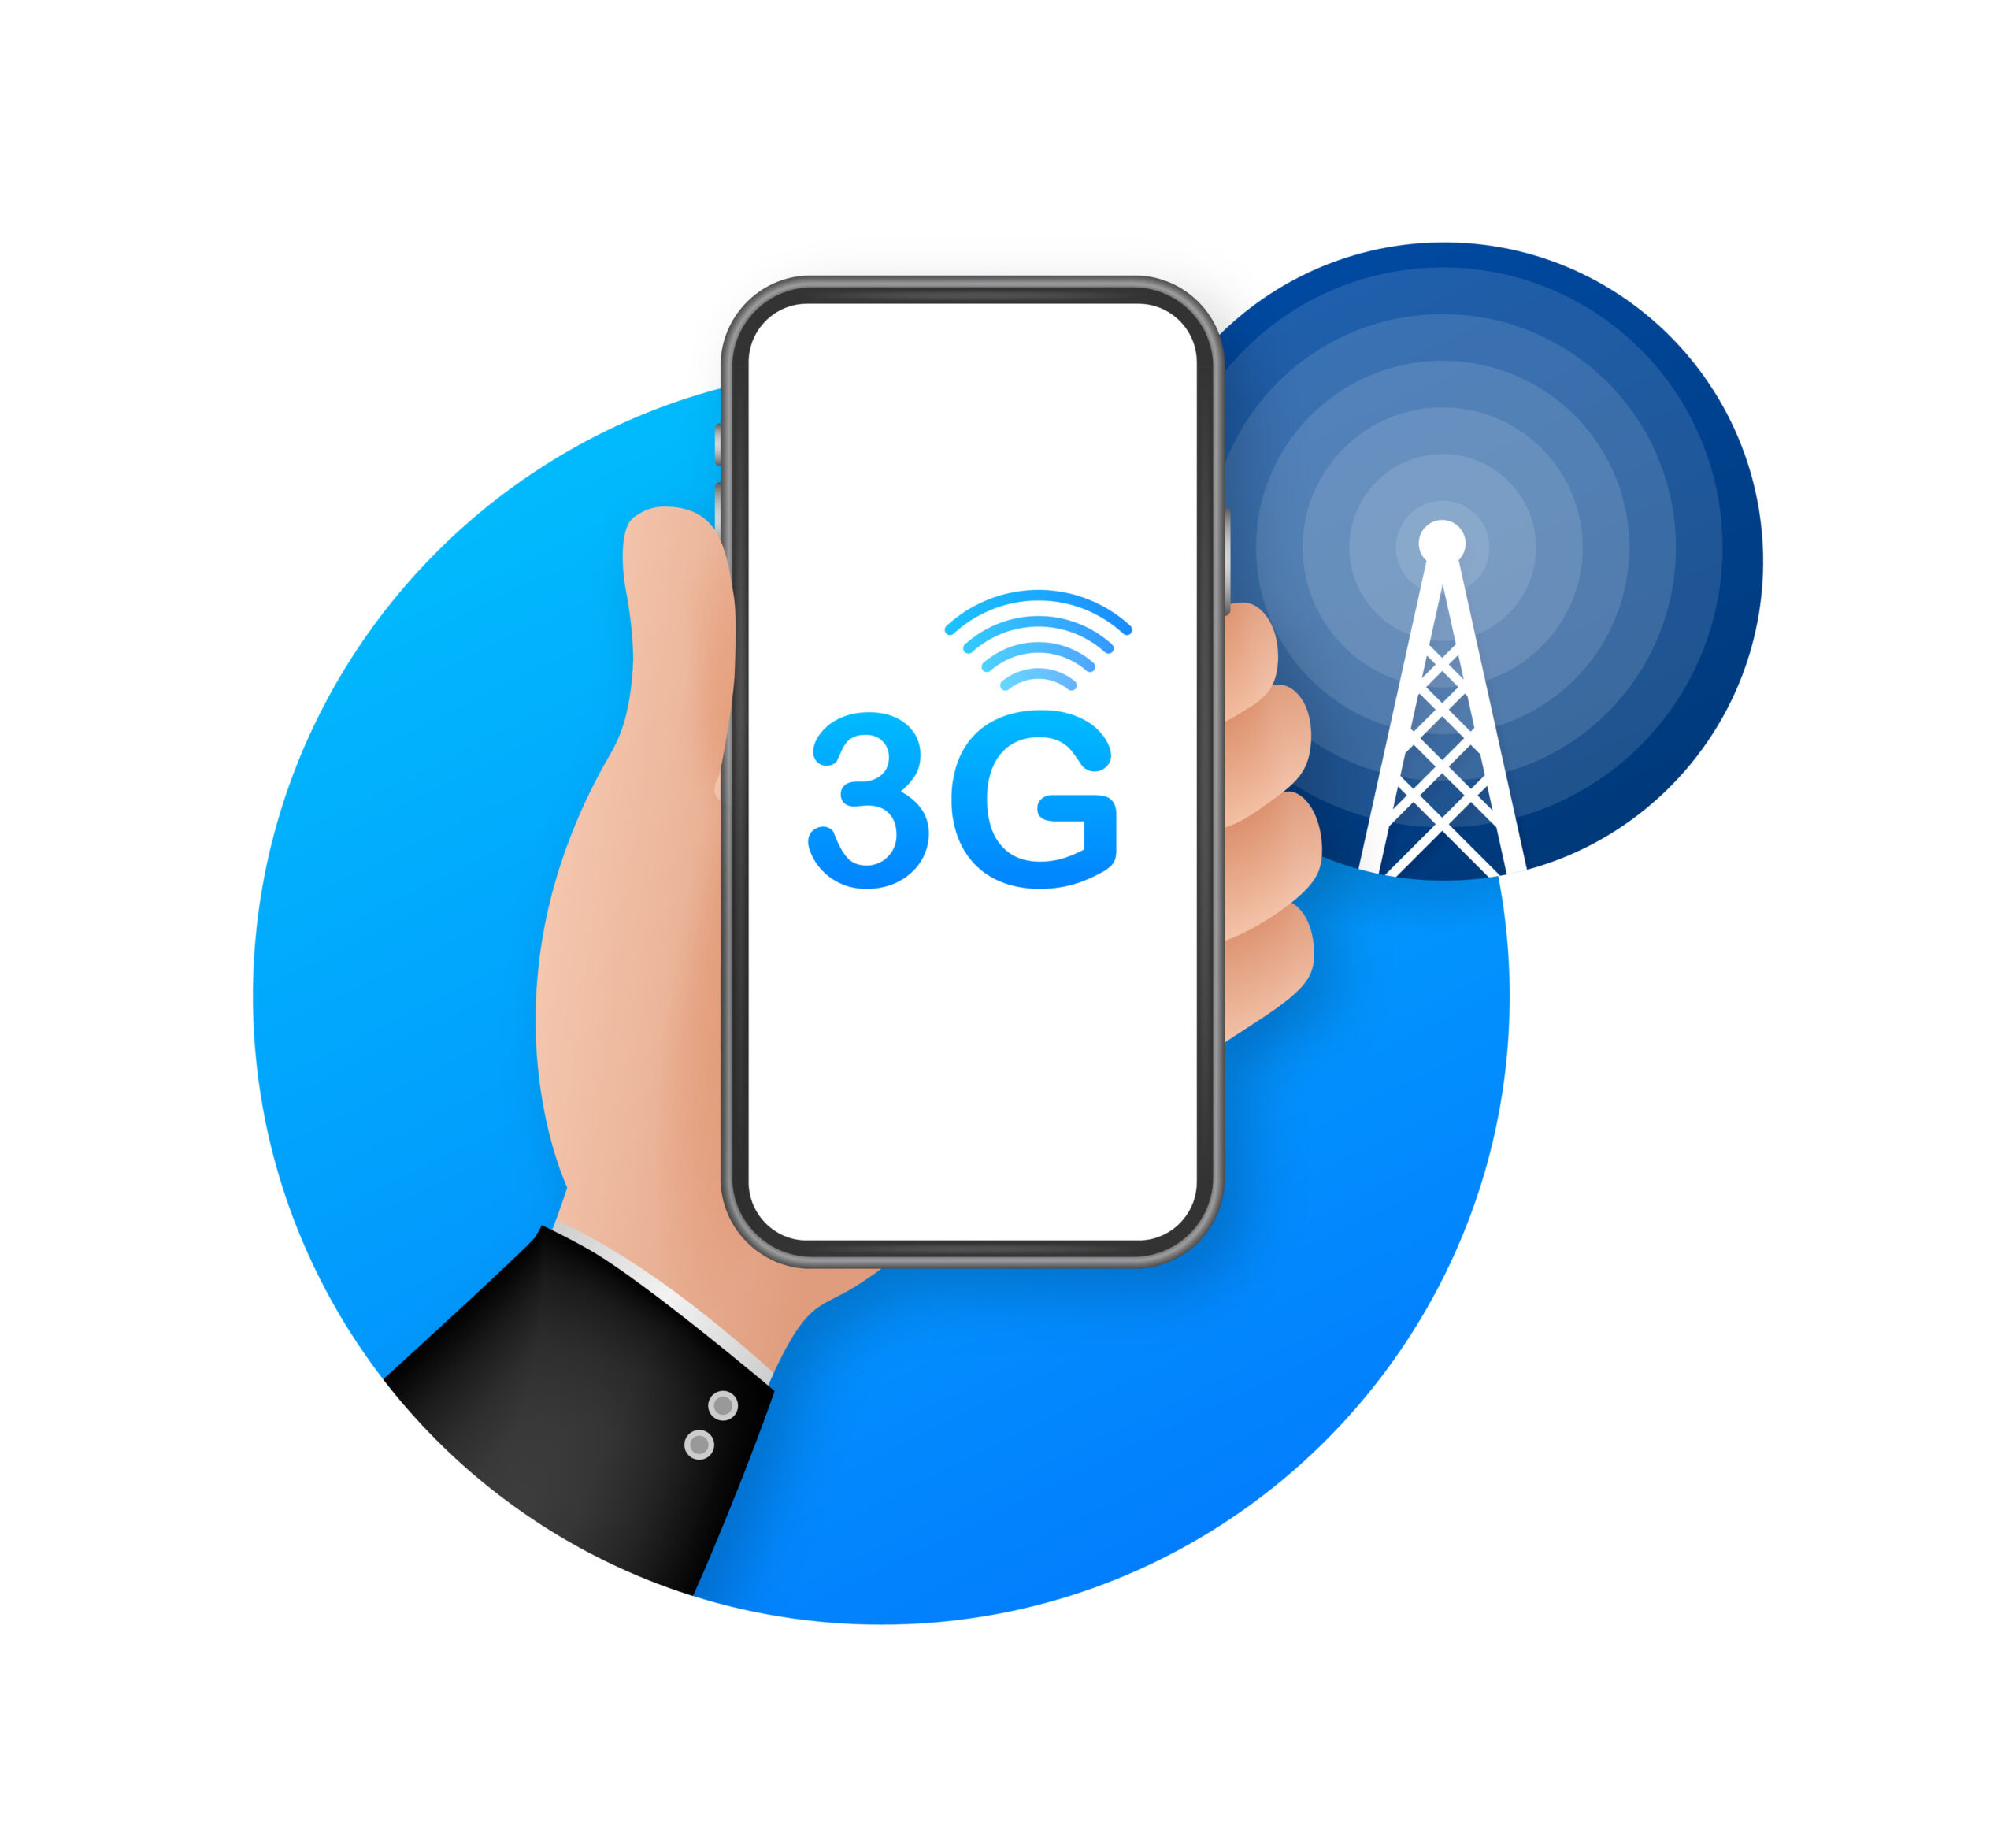 Cartoon hand holding phone that says 3G in front of cell tower